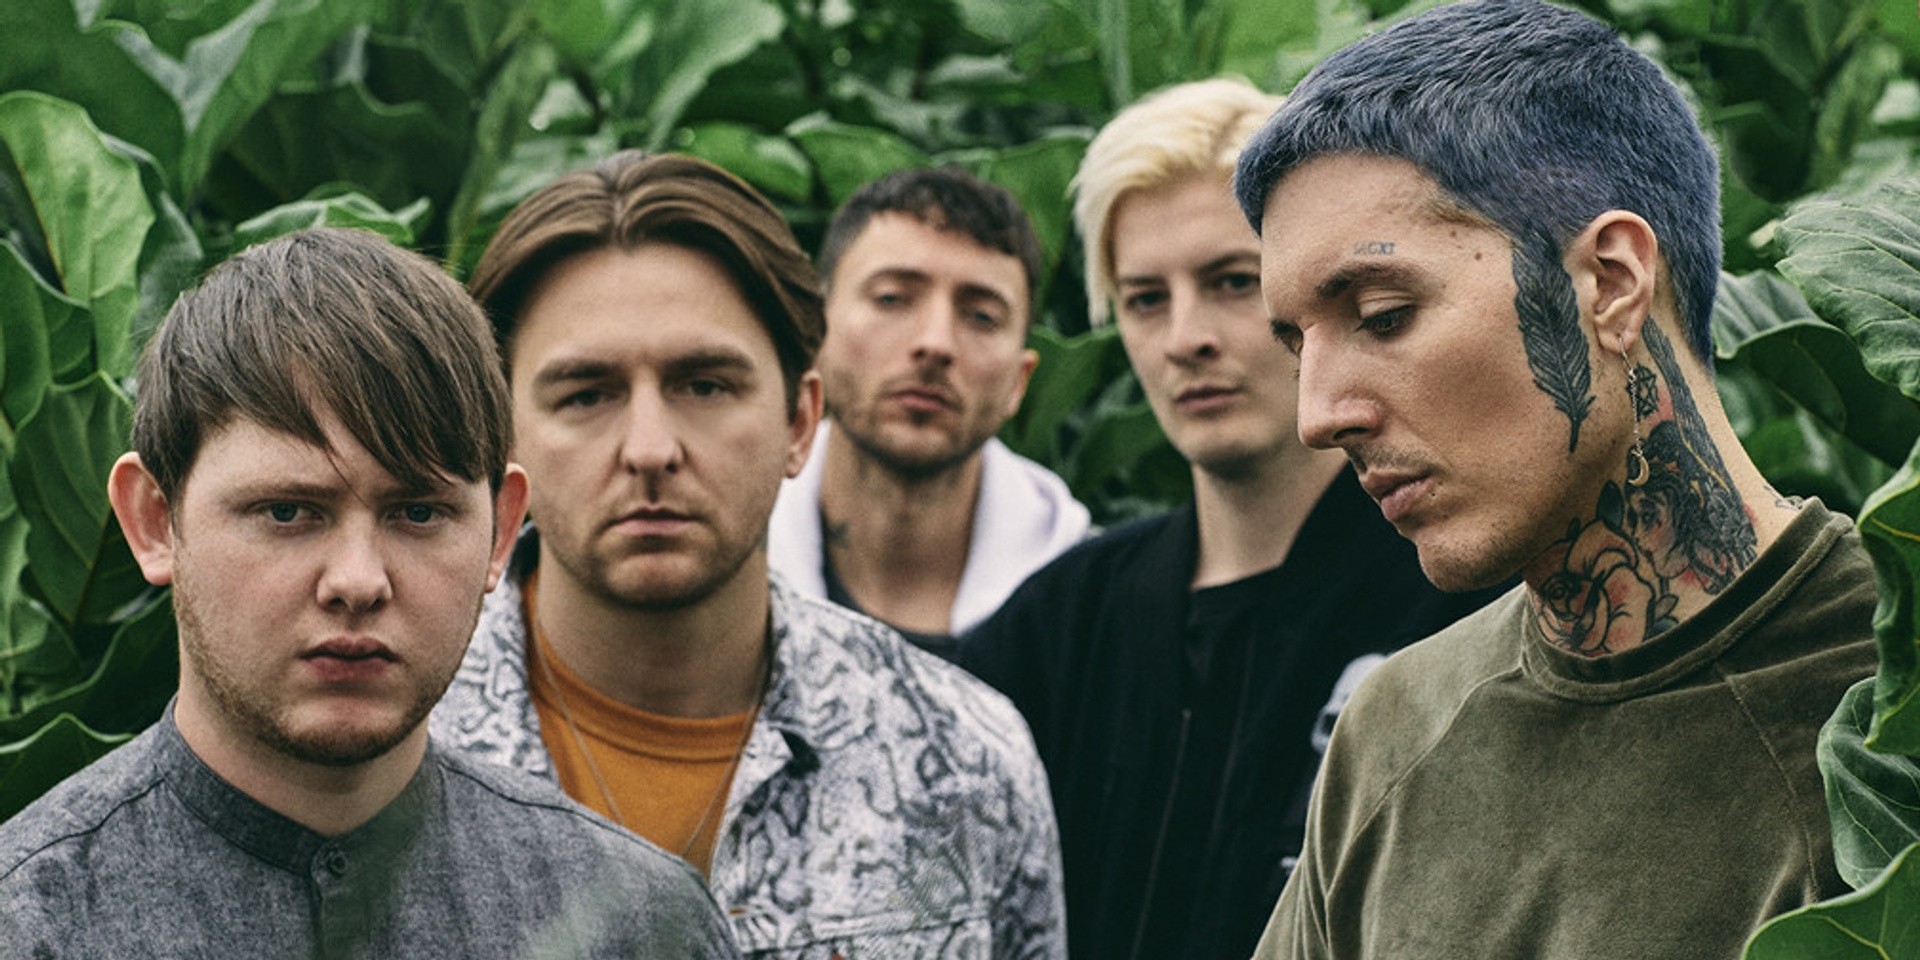 Bring Me The Horizon releases new electropop track 'Medicine' – watch